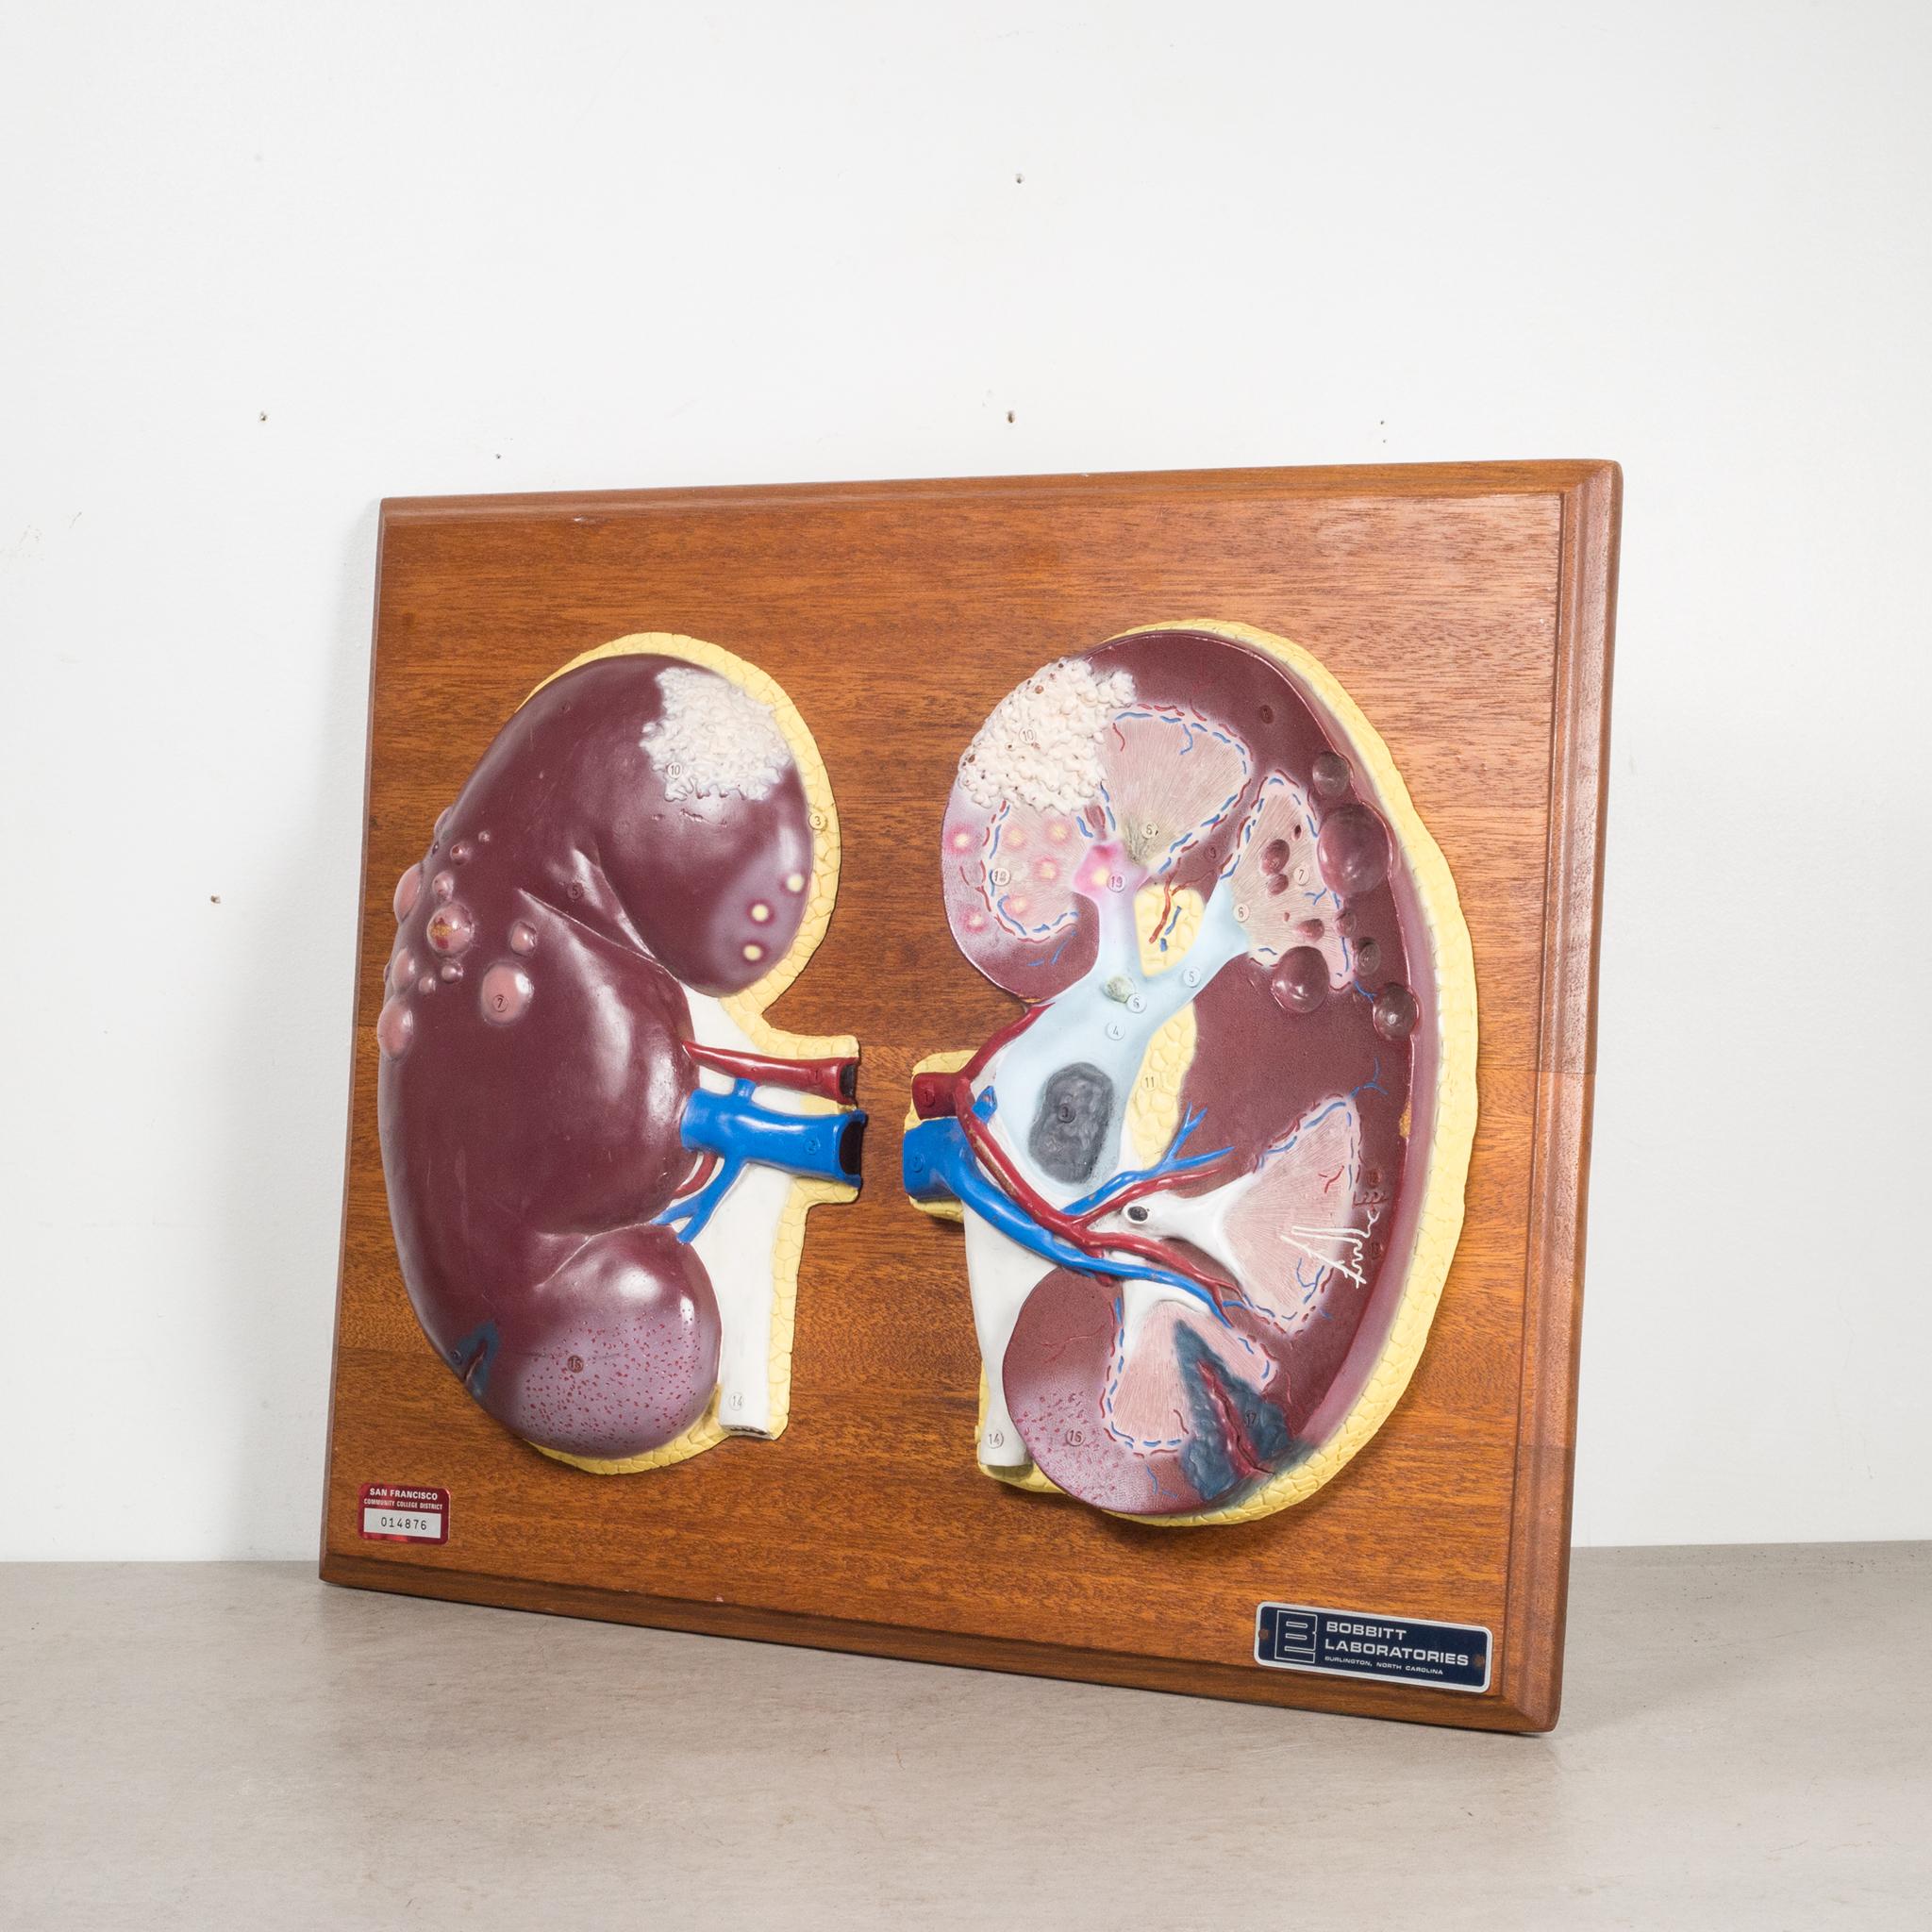 About

A detailed model of a human kidneys mounted on a wooden plaque. Used for medical training, each part of the kidneys are numbered probably corresponding to a text book. The piece has retained its original finish and is in good condition with